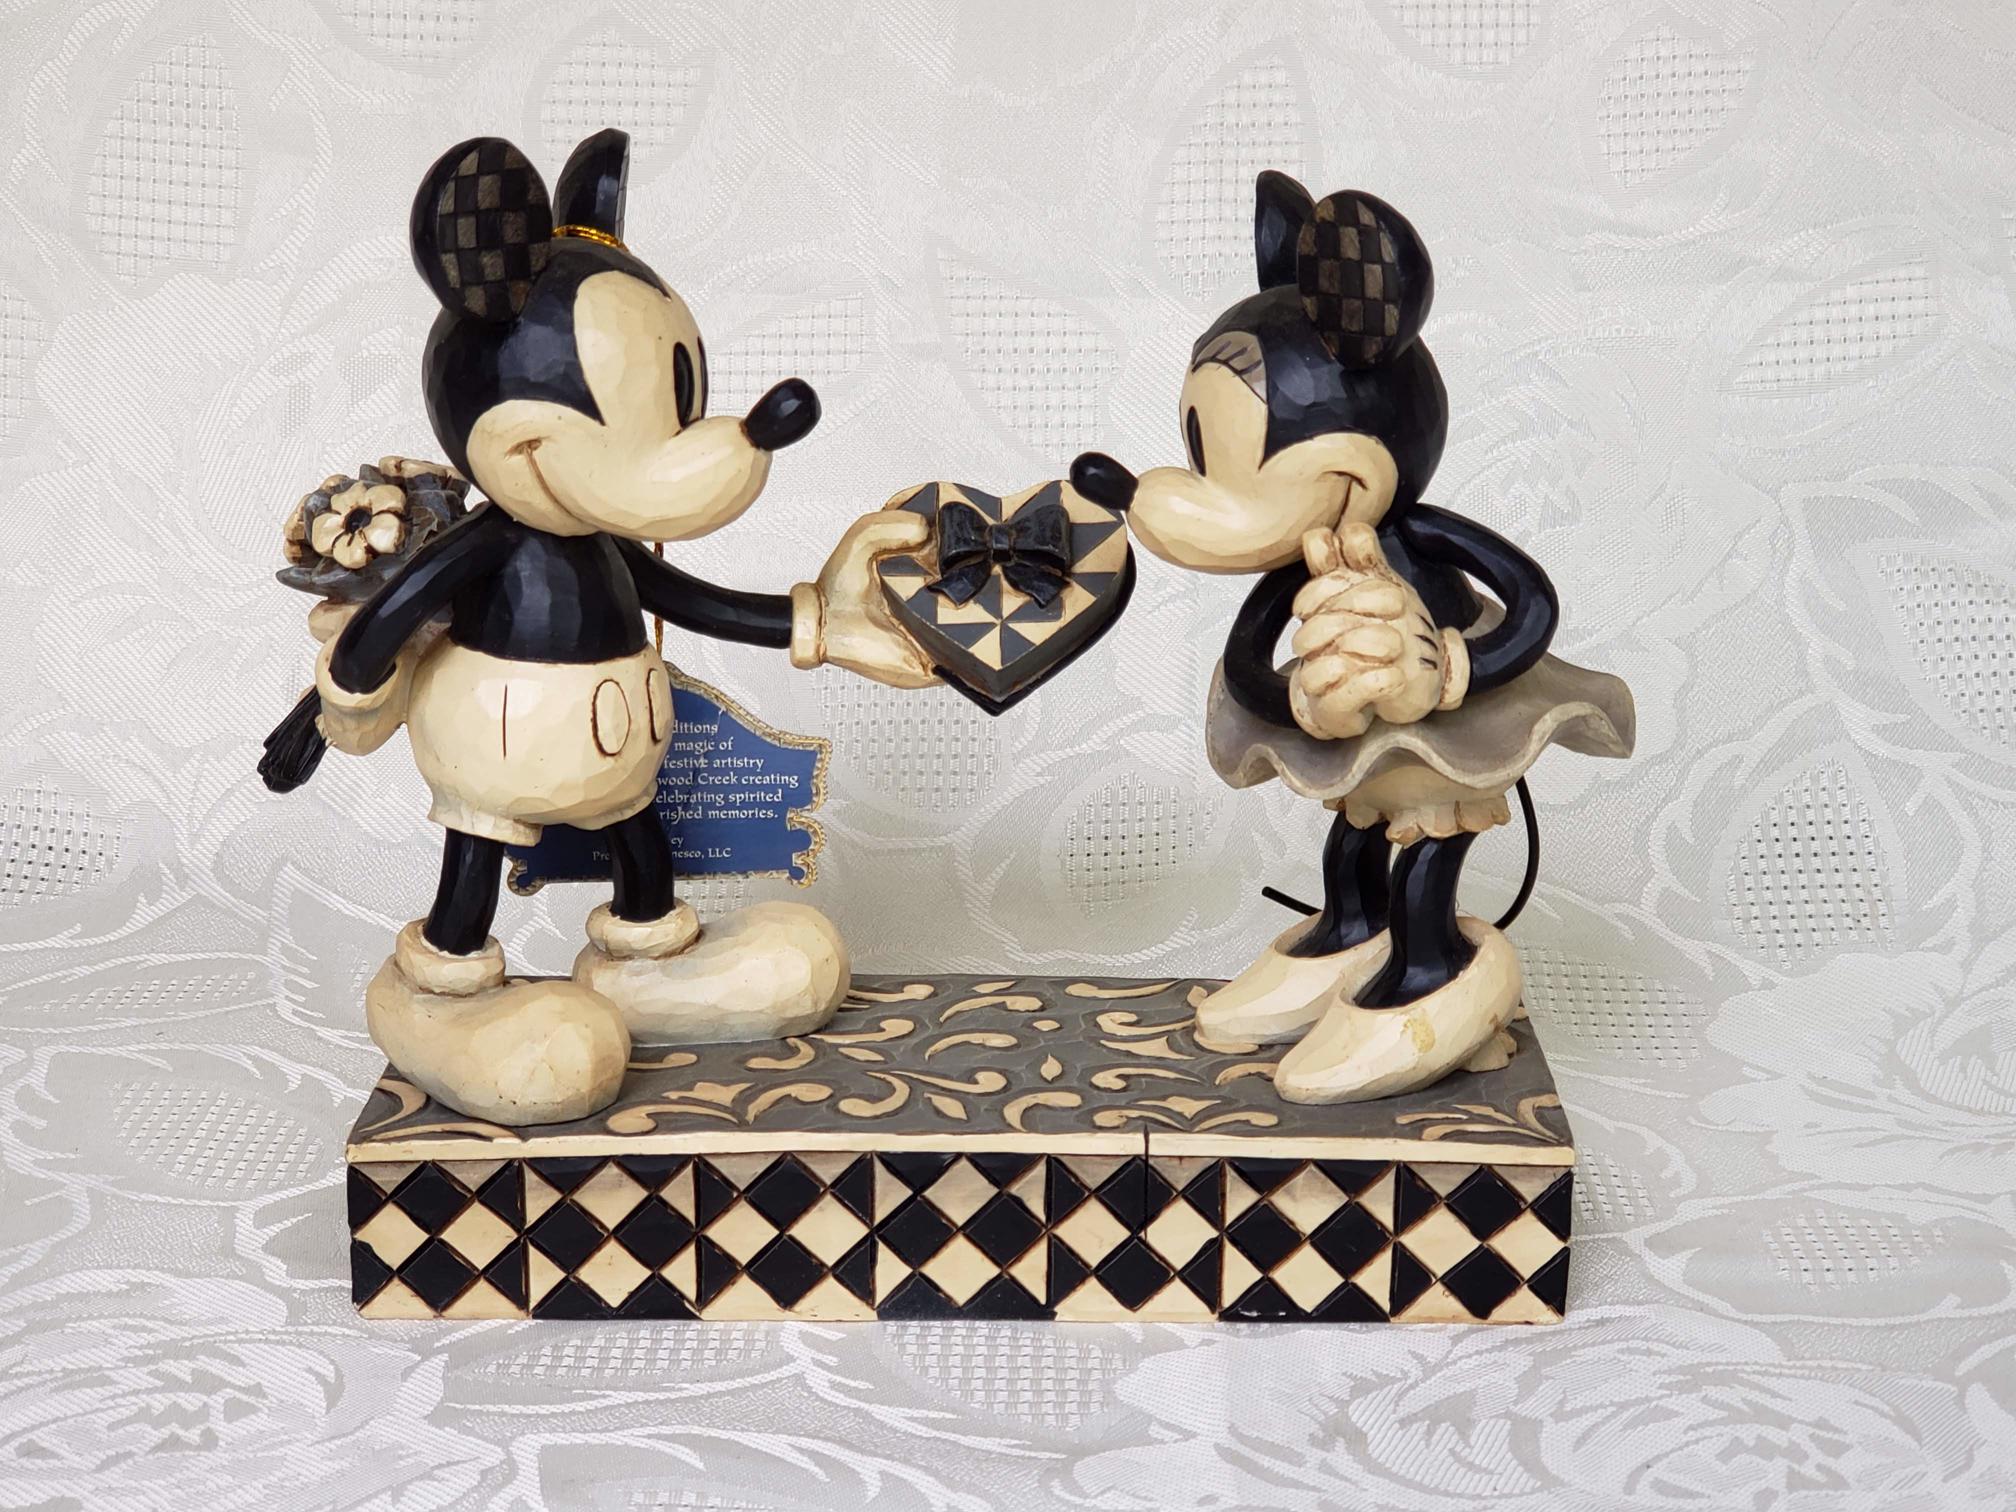 Disney Traditions 6000969 Blossoming Romance Mickey and Minnie Mouse Figurine